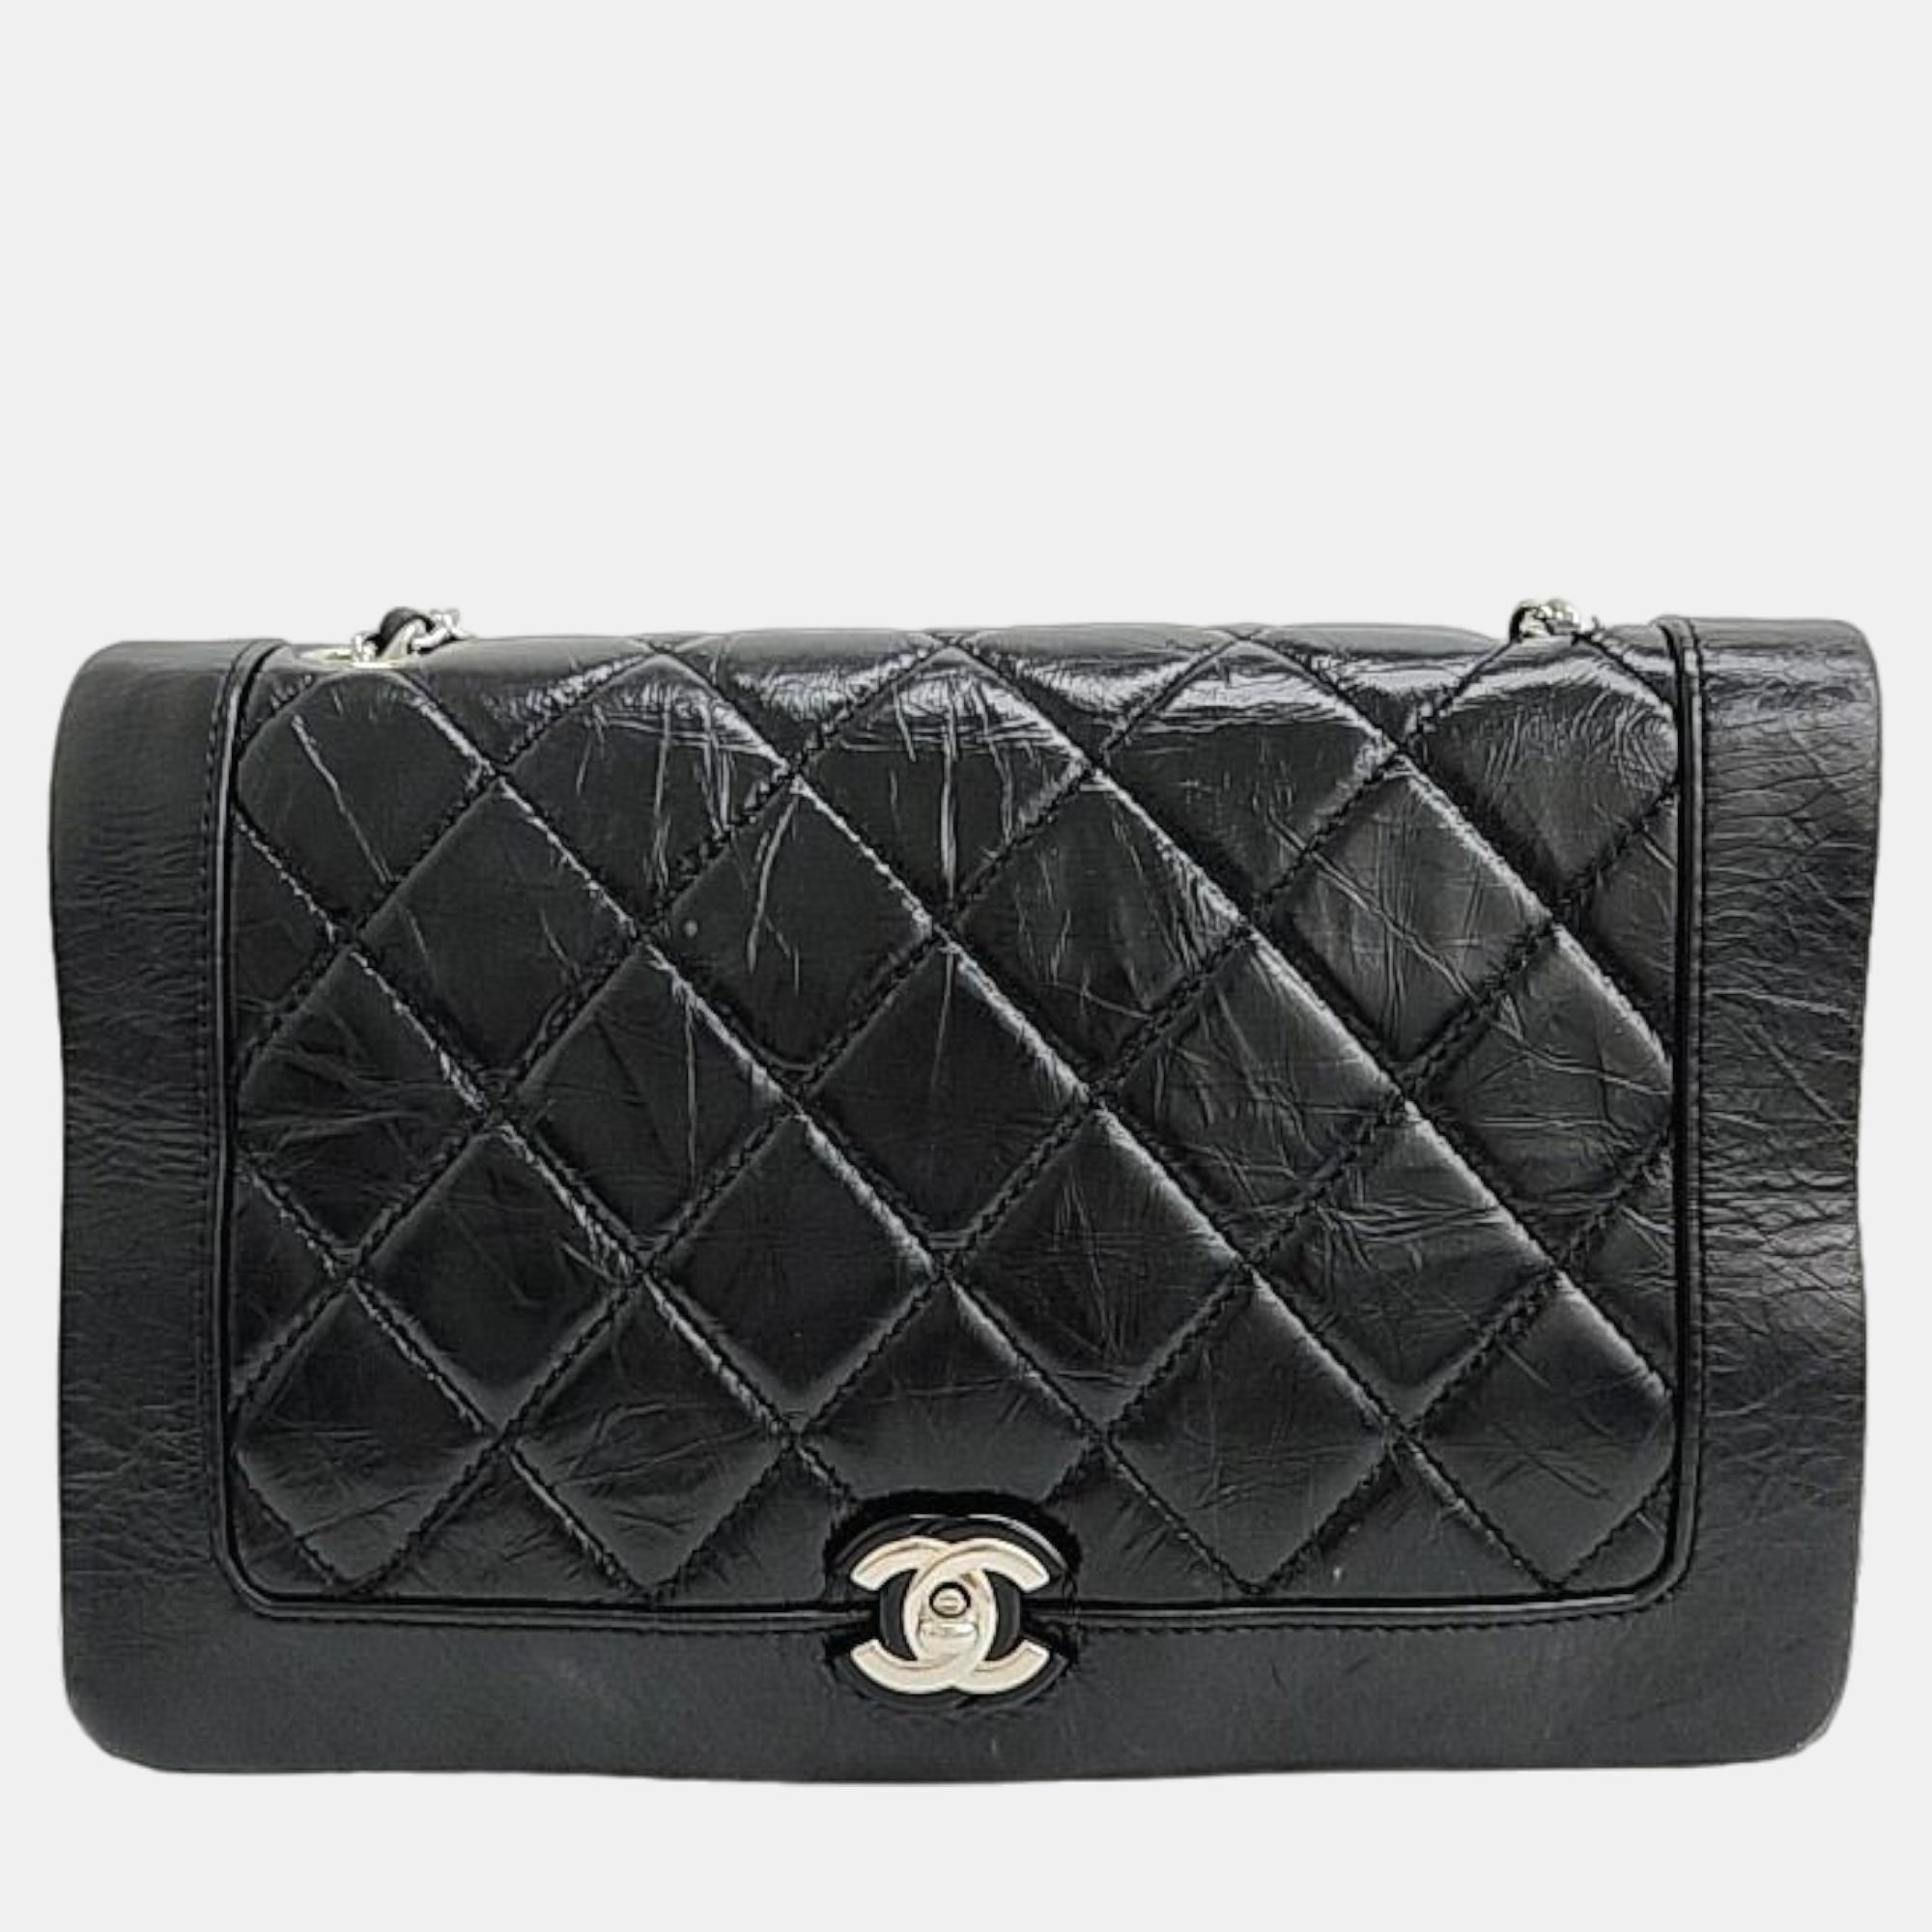 Indulge in timeless elegance with this Chanel bag meticulously crafted to perfection. Its exquisite details and luxurious materials make it a statement piece for any sophisticated ensemble.